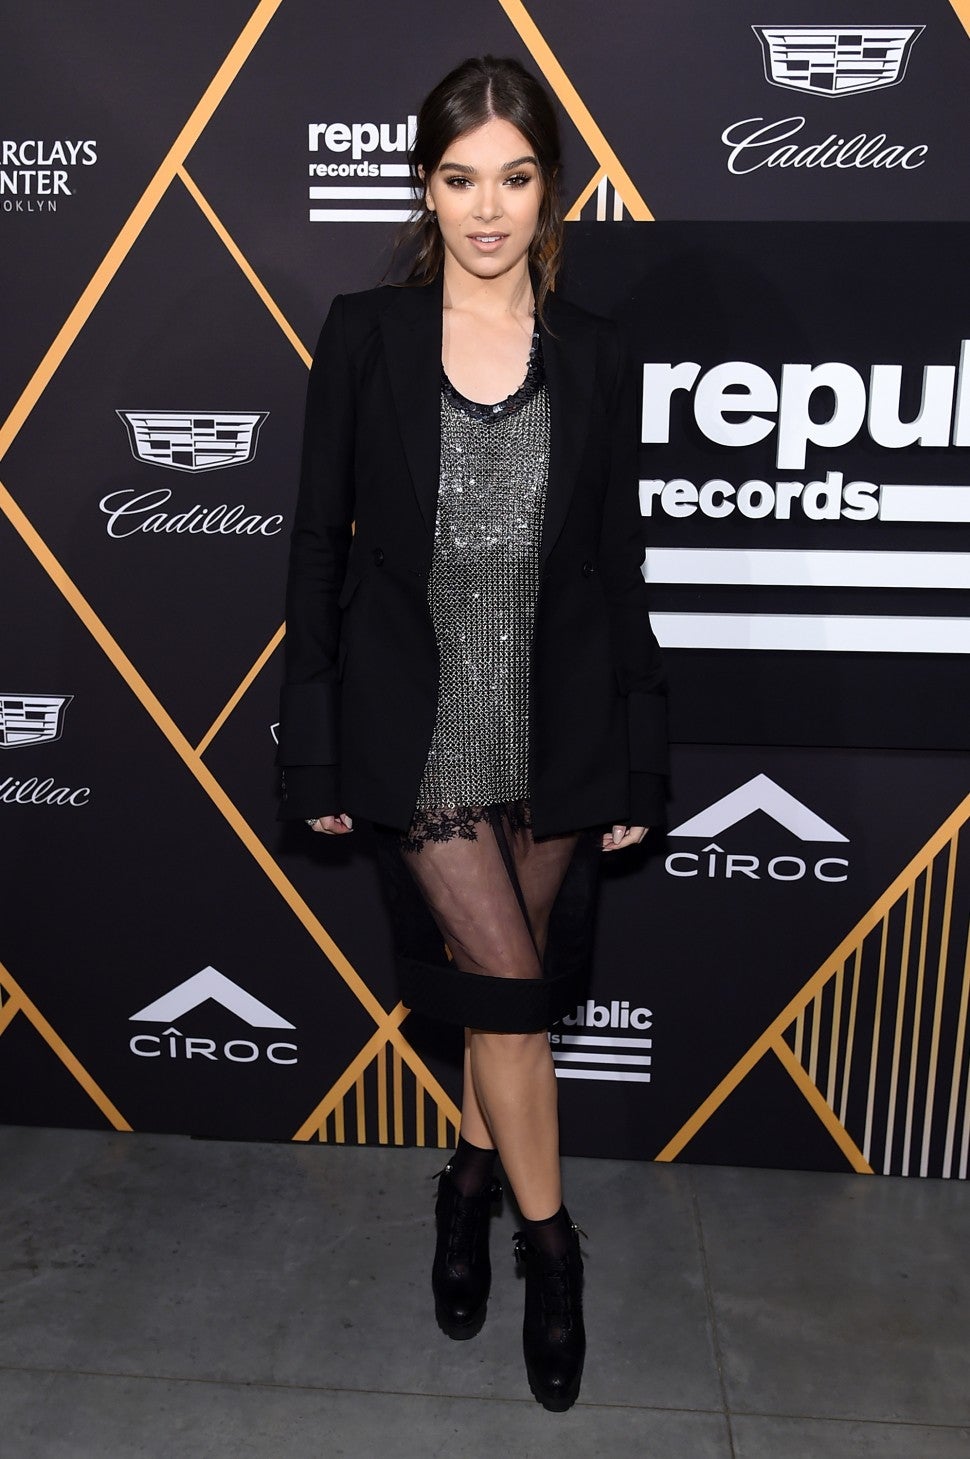 Hailee Steinfeld Republic Records party